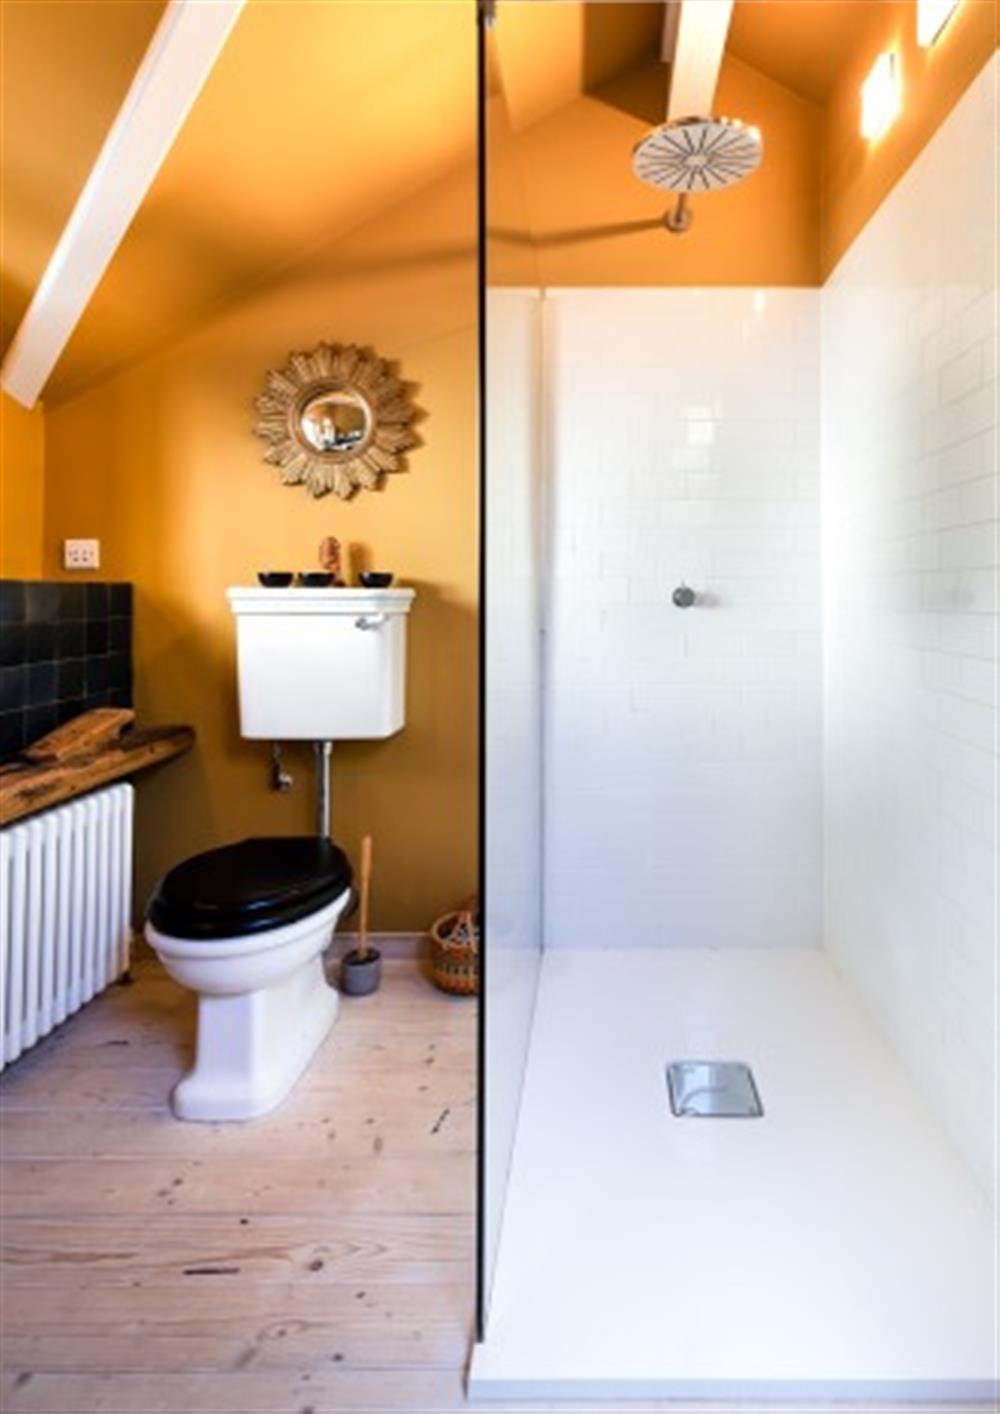 There's also a large shower cubicle with a drench head in the family bathroom - perfect for those early mornings when you want to wake up and go. at Carabone Cottage in The Lizard